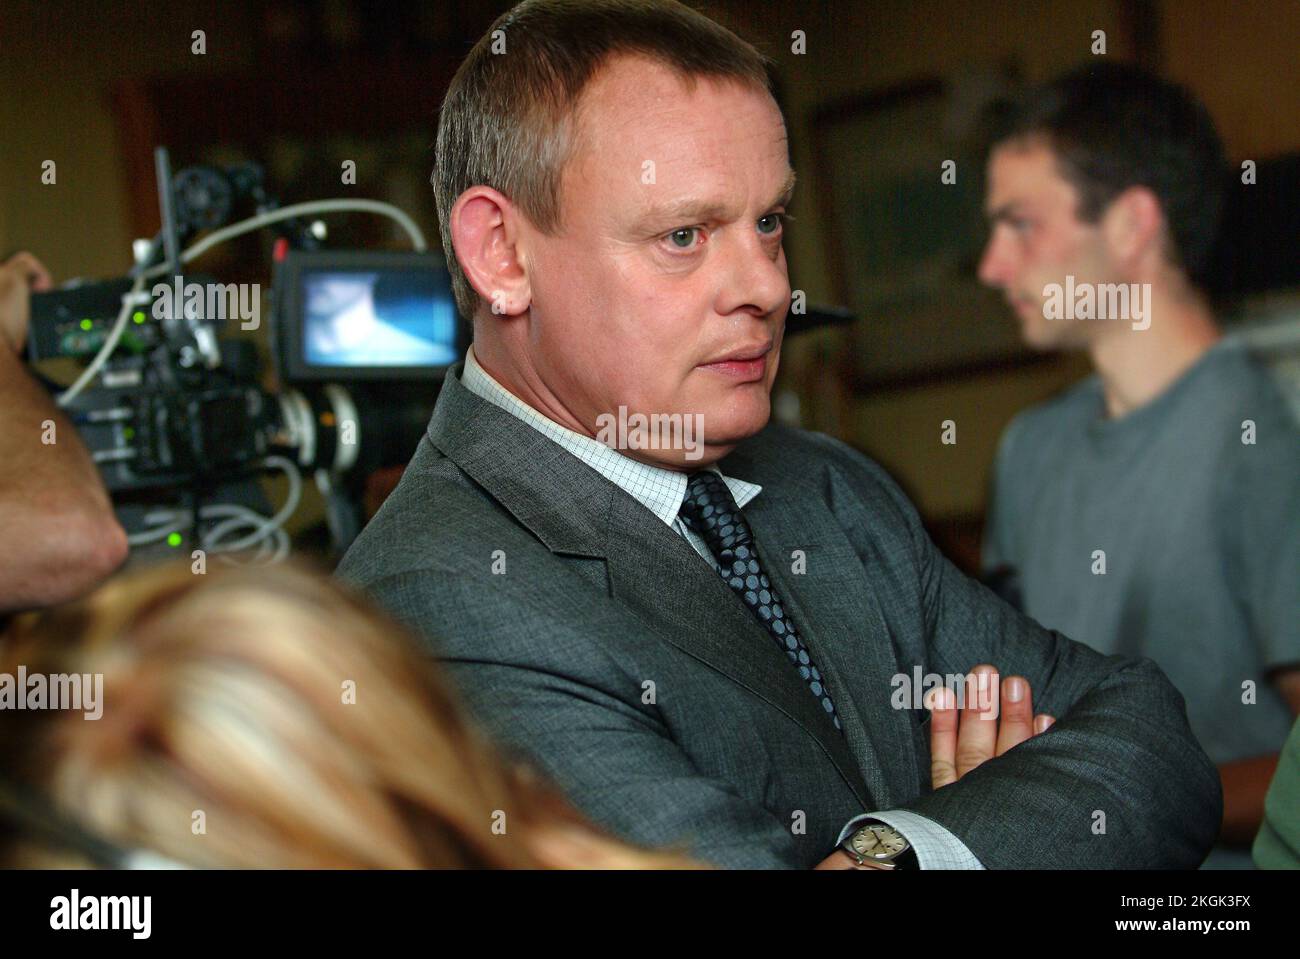 Martin clunes hi-res stock photography and images image